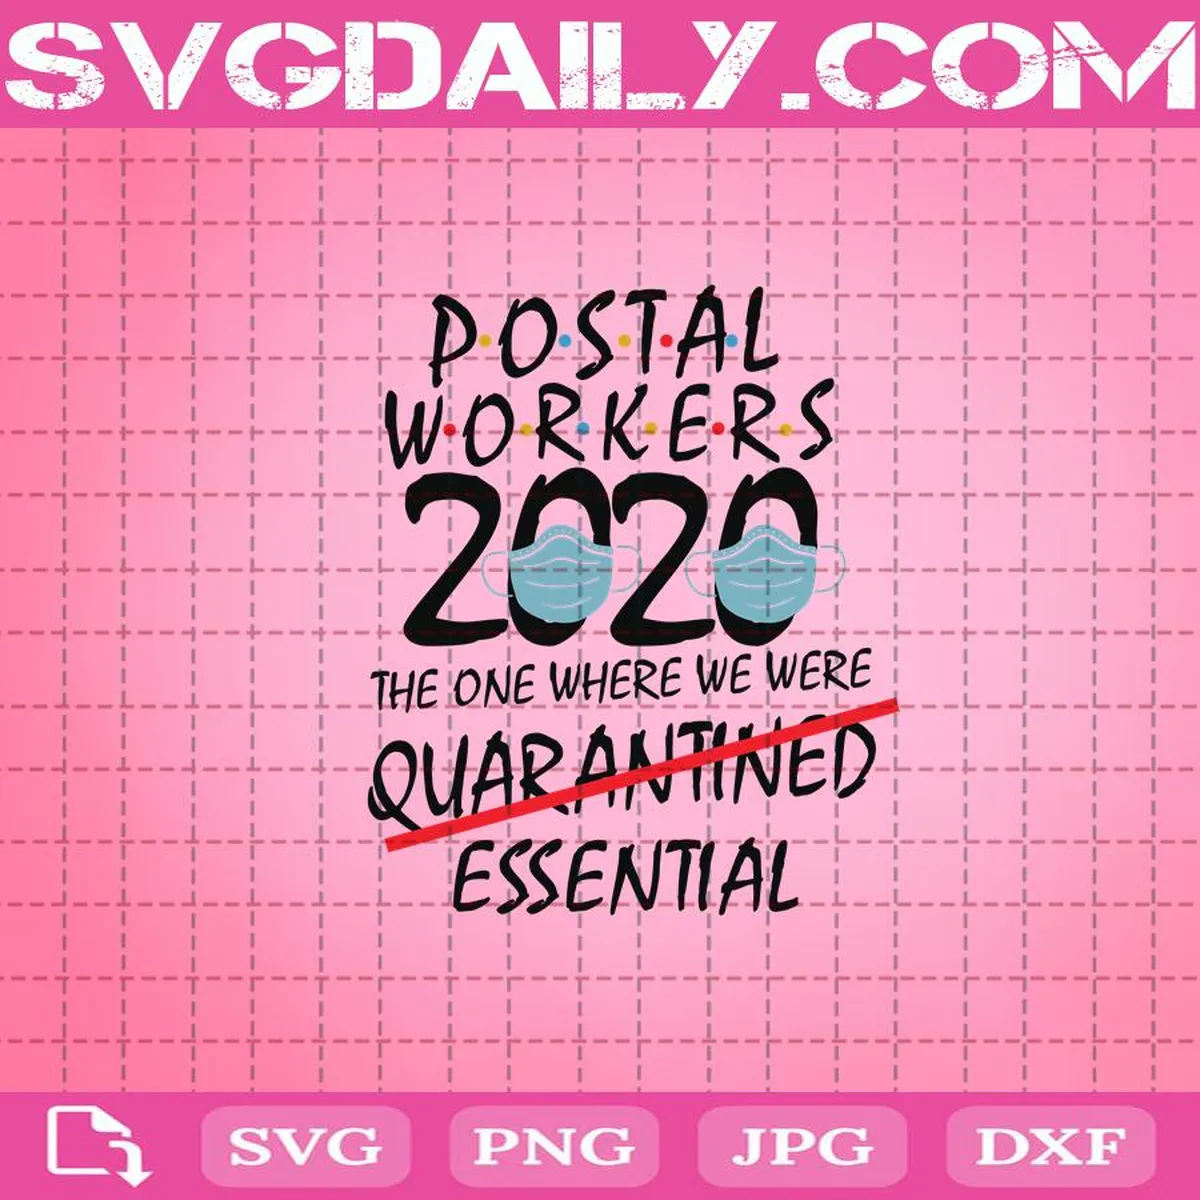 Postal Workers 2020-The One Where We Were Quarantined Essential Svg, Face Mask Svg, Postal Workers Svg, Quarantined Svg